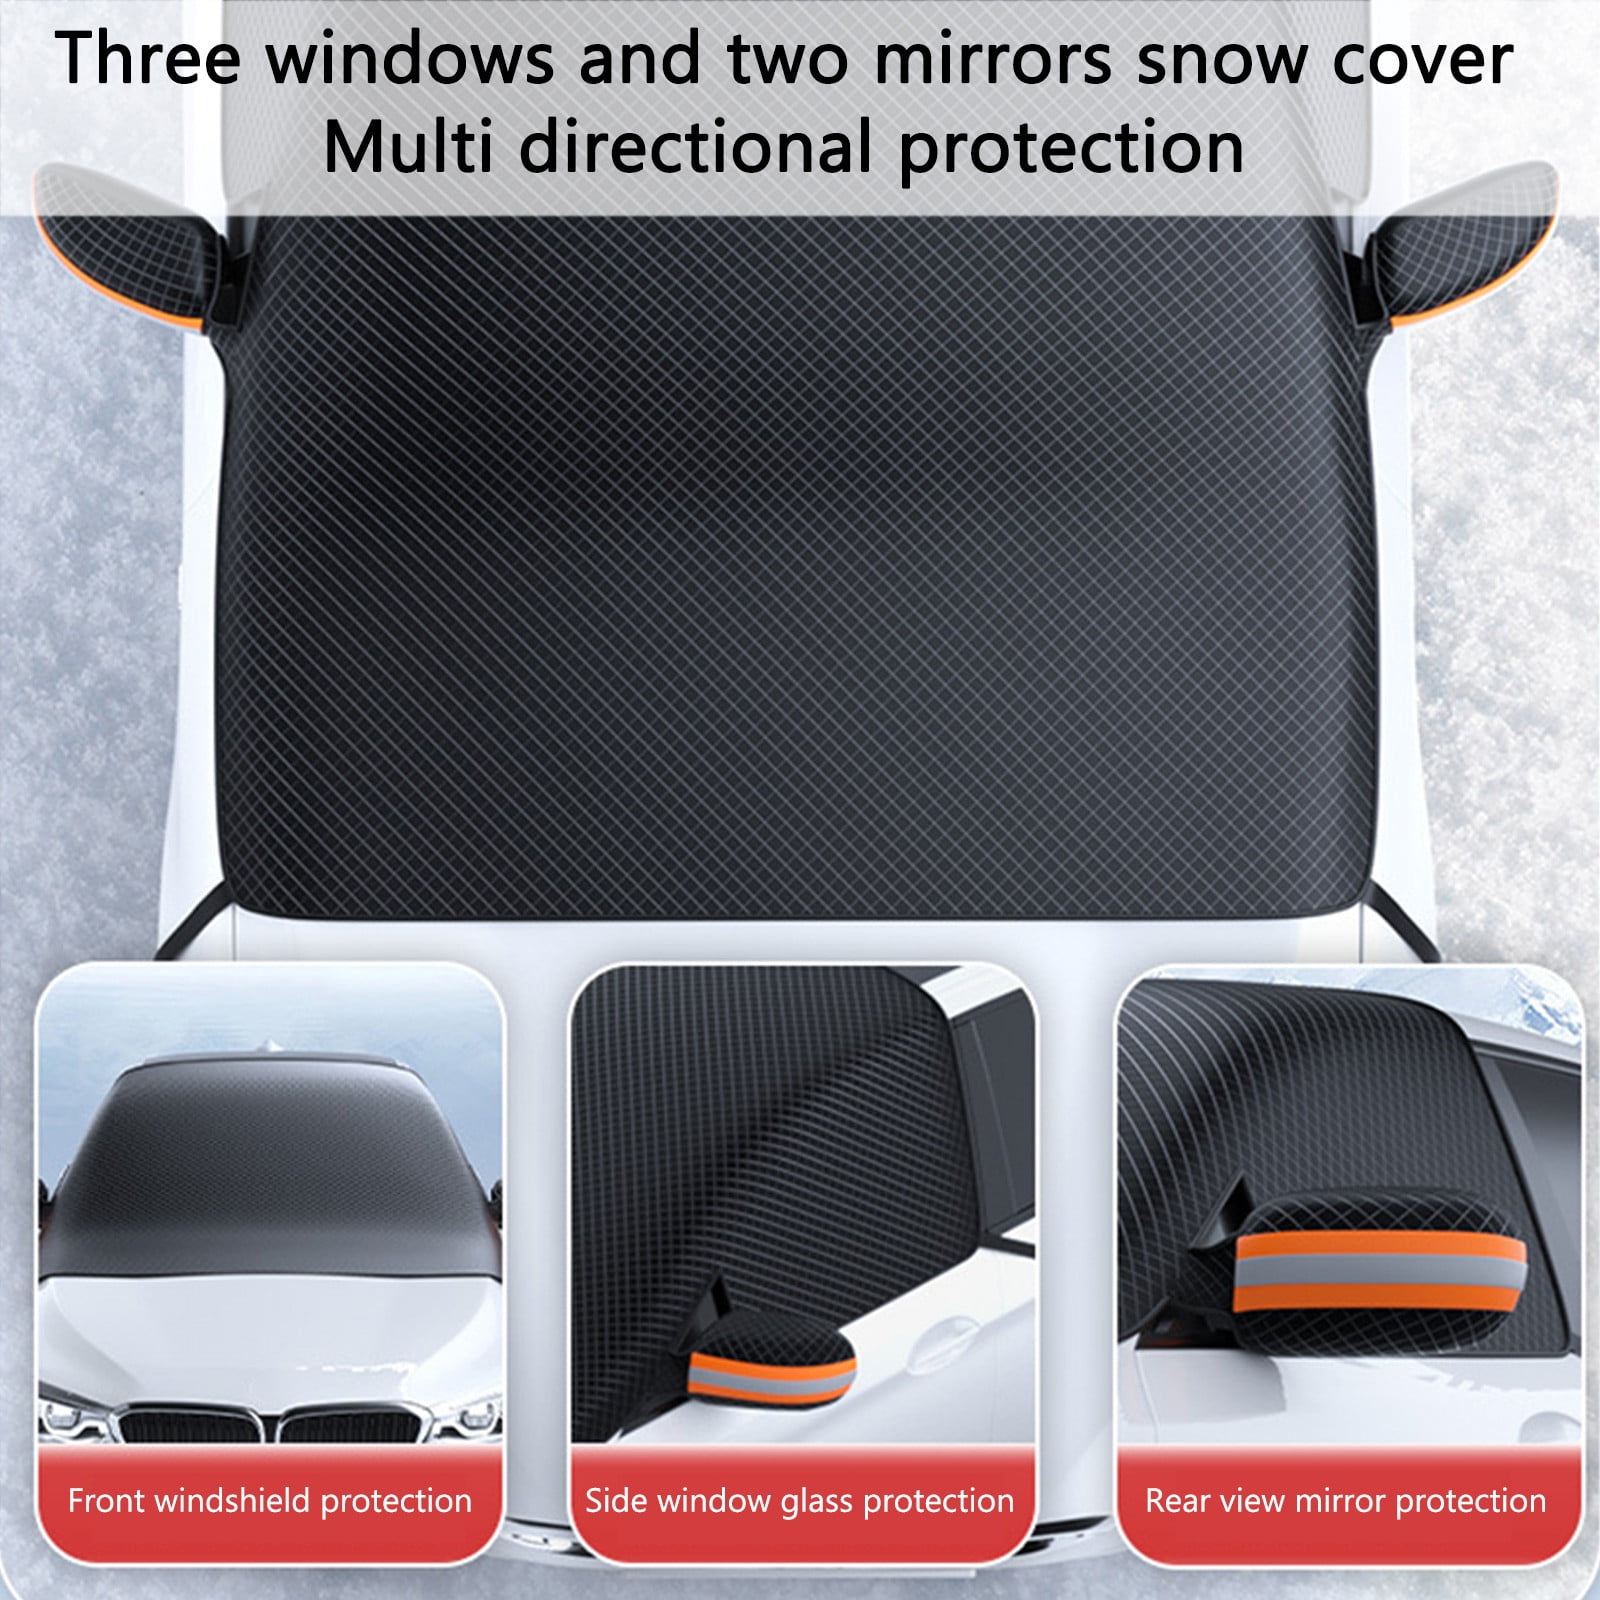 Mightlink Windshield Snow Cover Dustproof Sun-resistant Anti-Frost